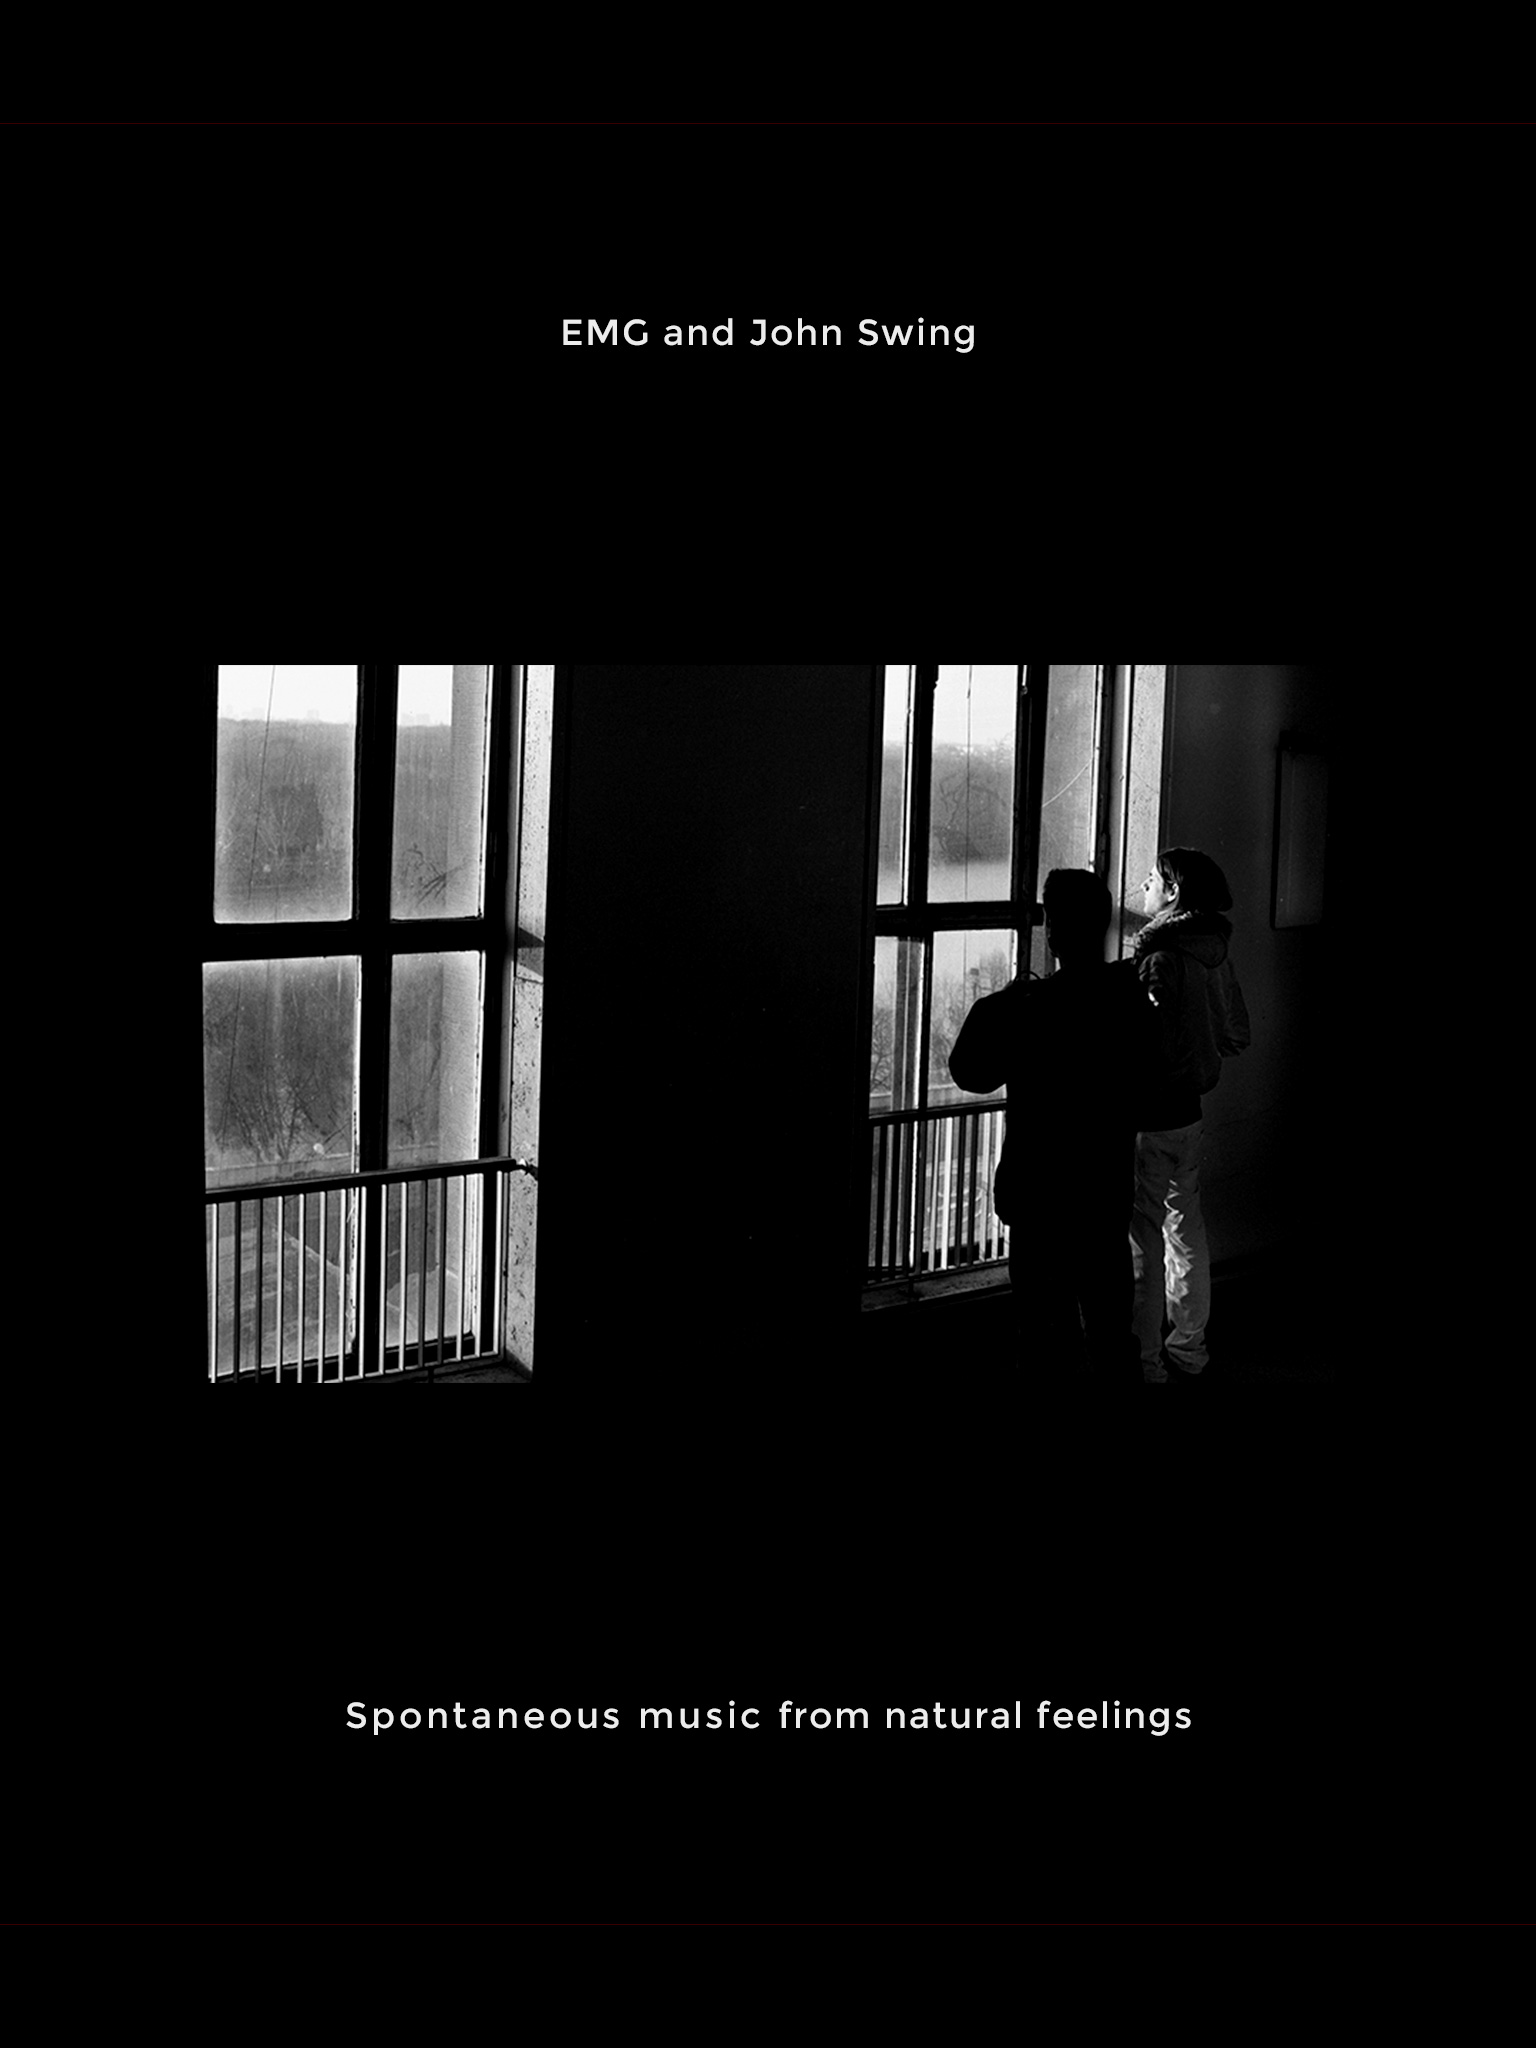 EMG and John Swing: Spontaneous music from natural feelings